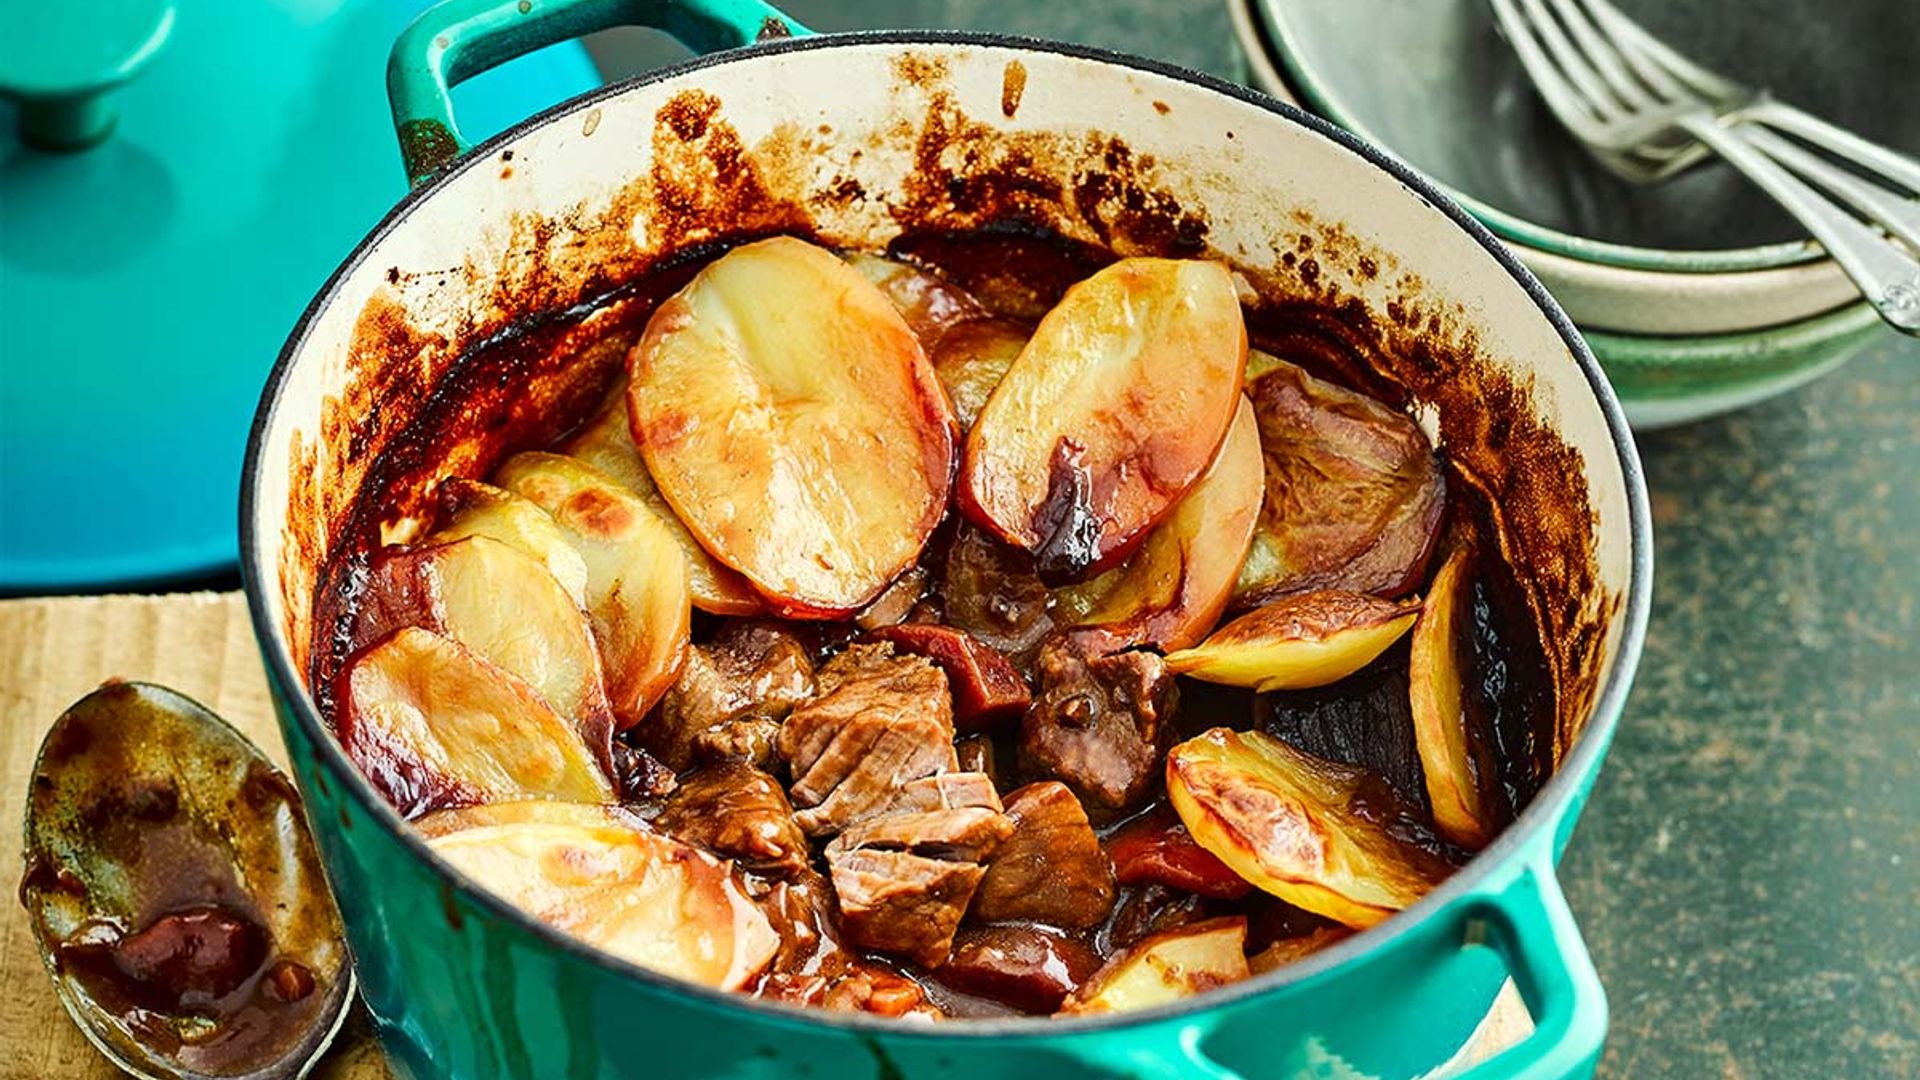 A comforting Irish beef and baby beetroot hotpot recipe from chef Terry Edwards